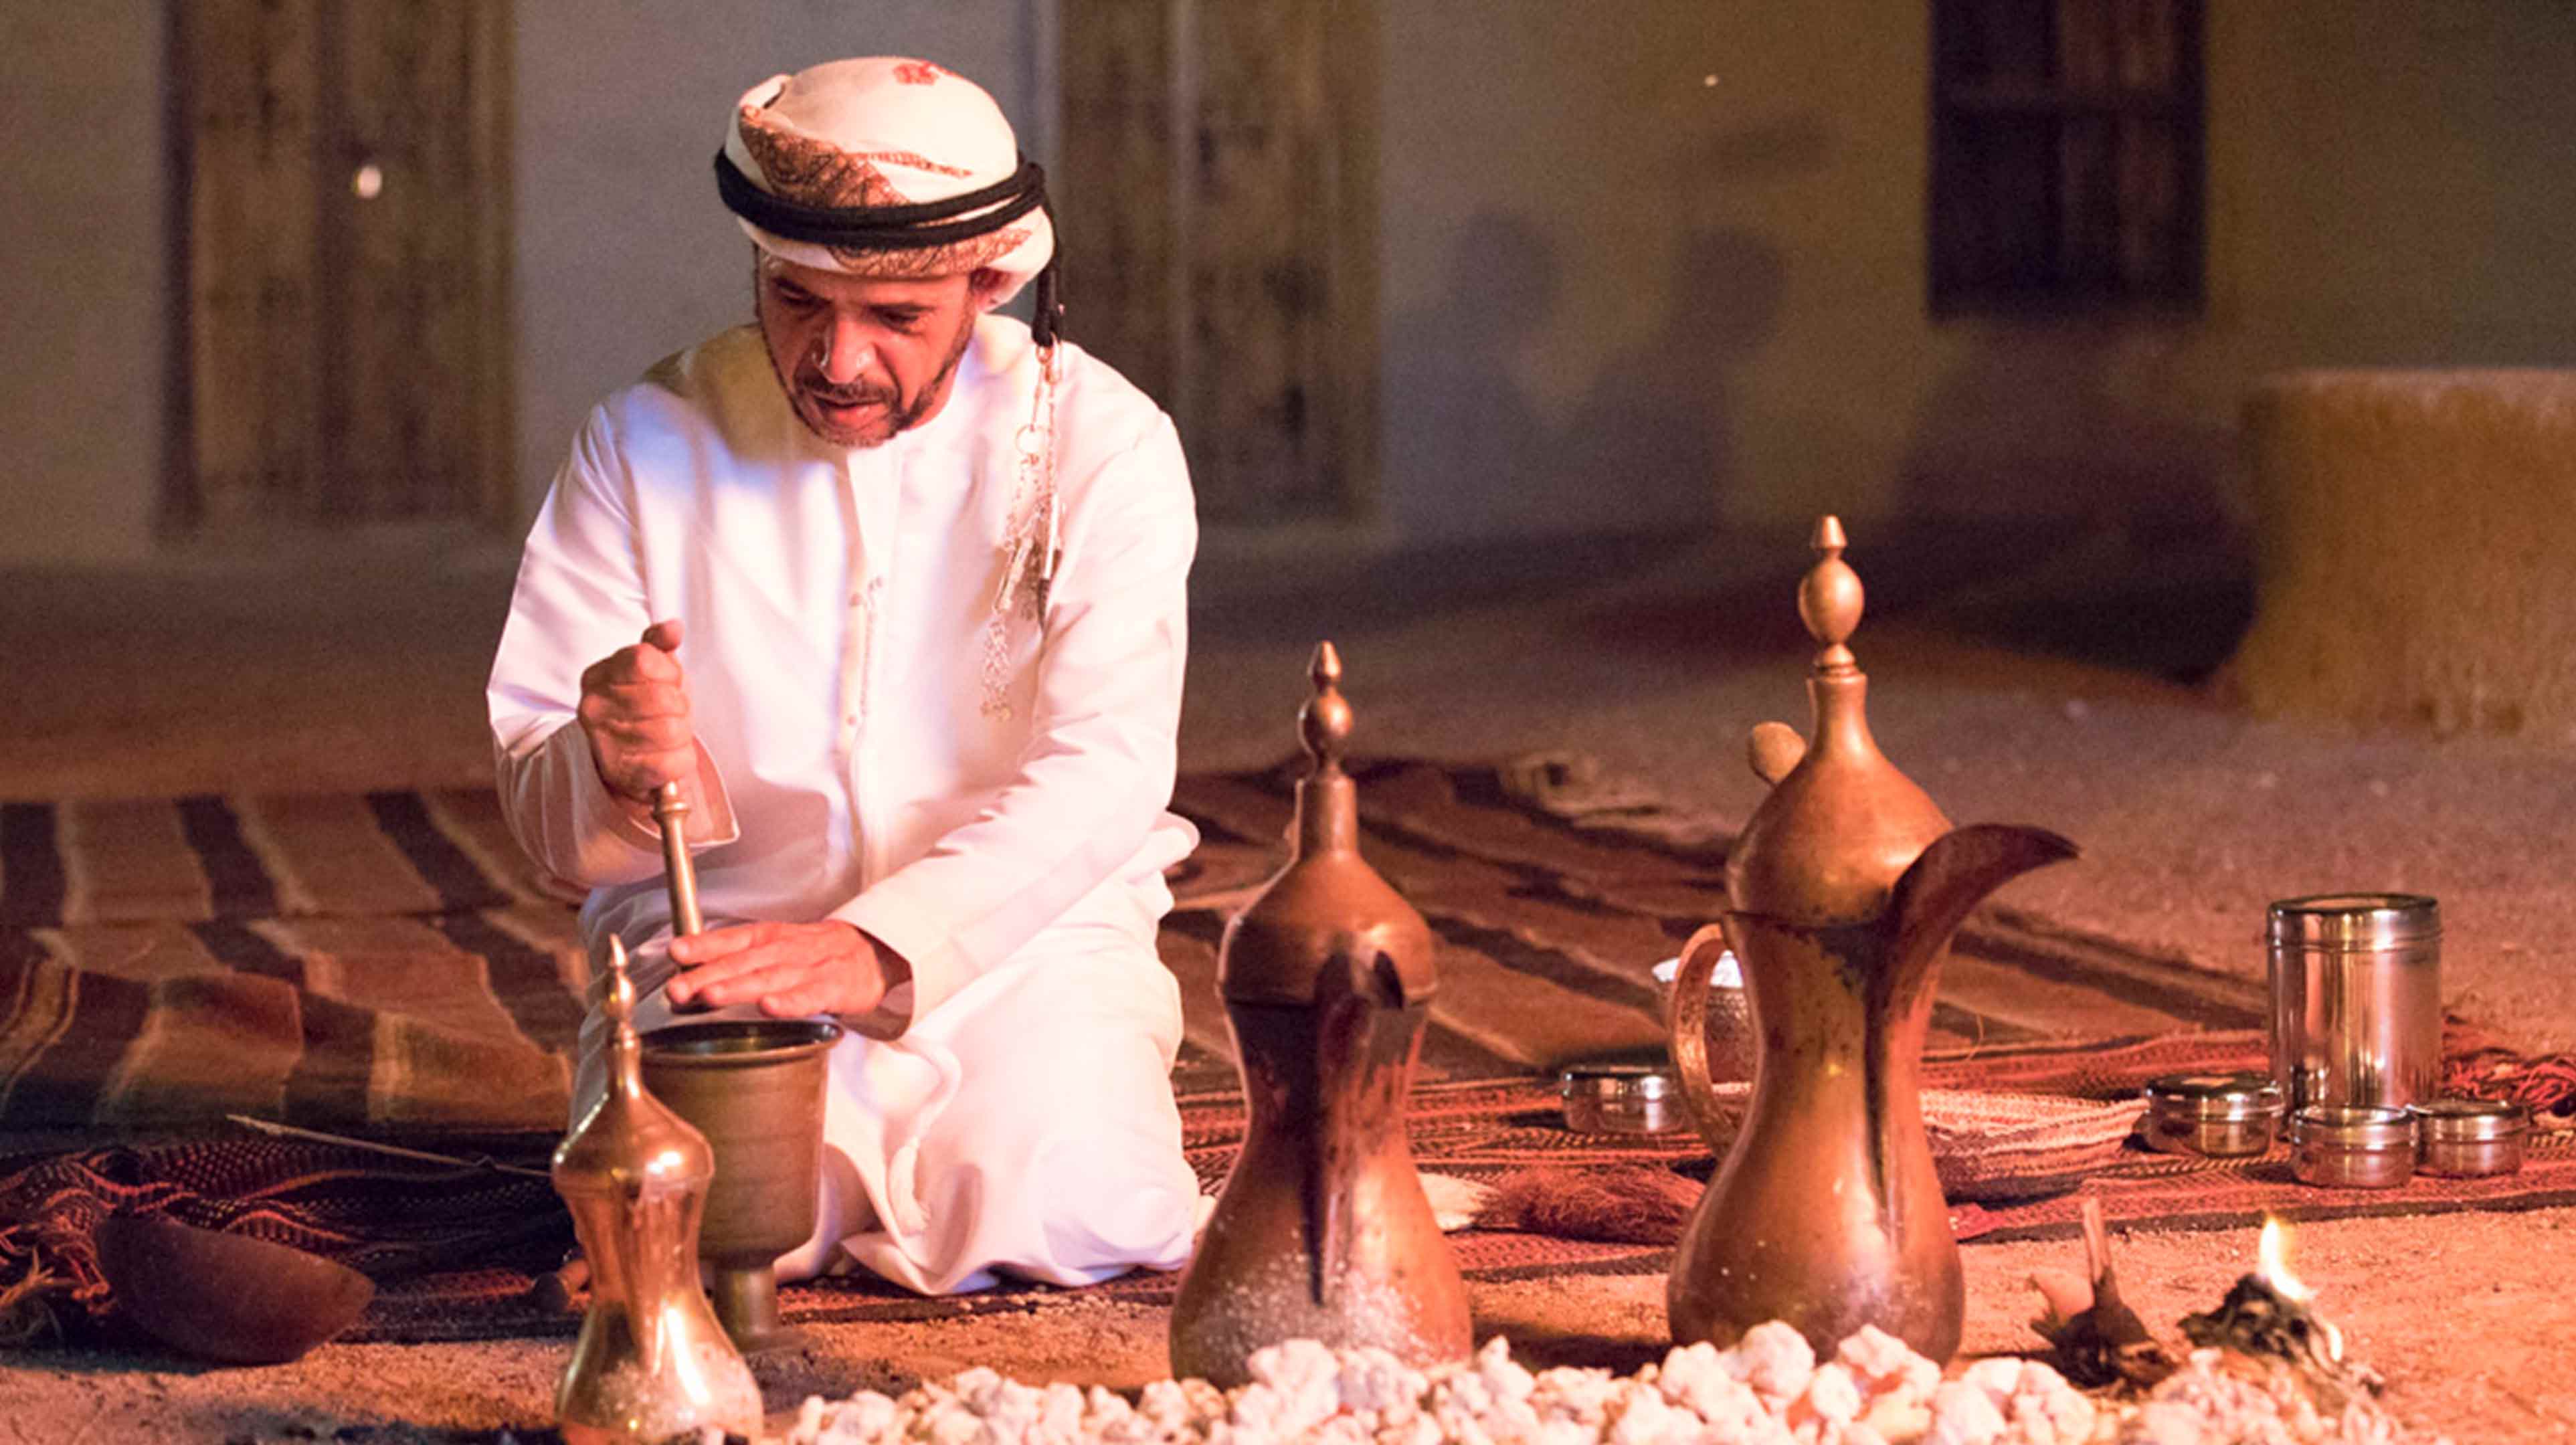 Emirati man crushing beans for a traditional coffee